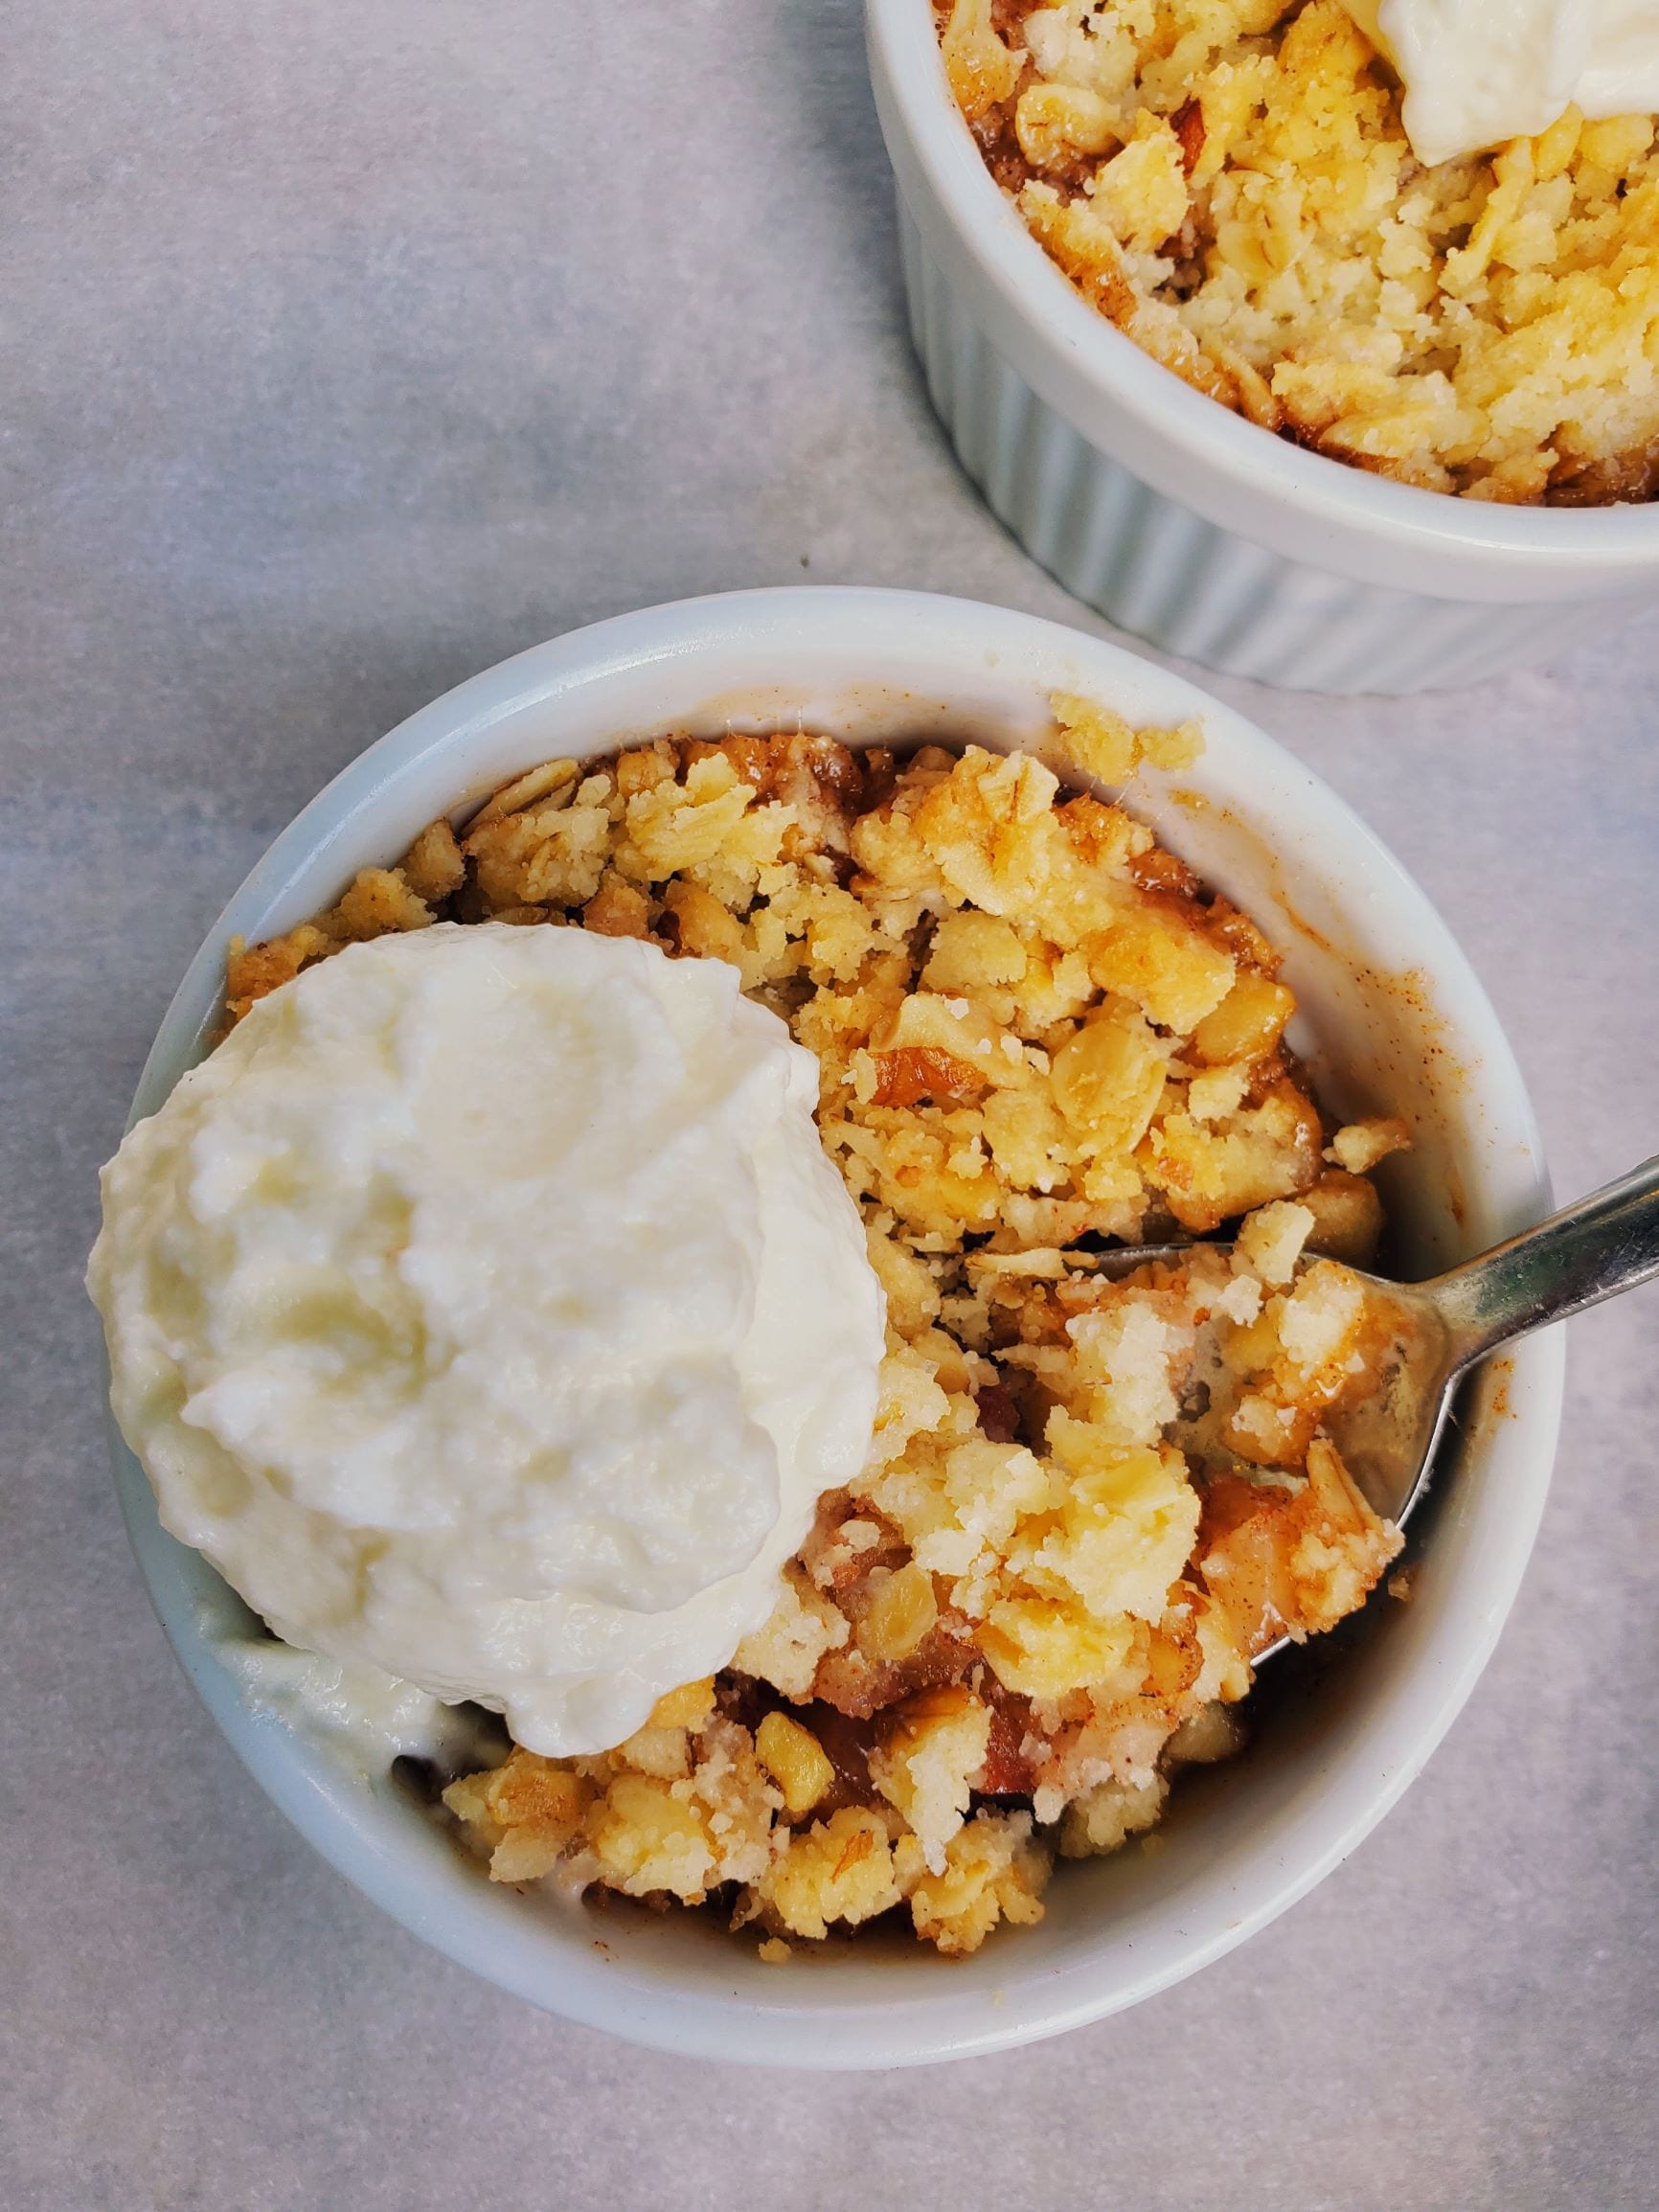 https://www.amysnutritionkitchen.com/wp-content/uploads/2021/05/Apple-Crumble-For-Two-Snapseed-WordPress-picture.jpeg